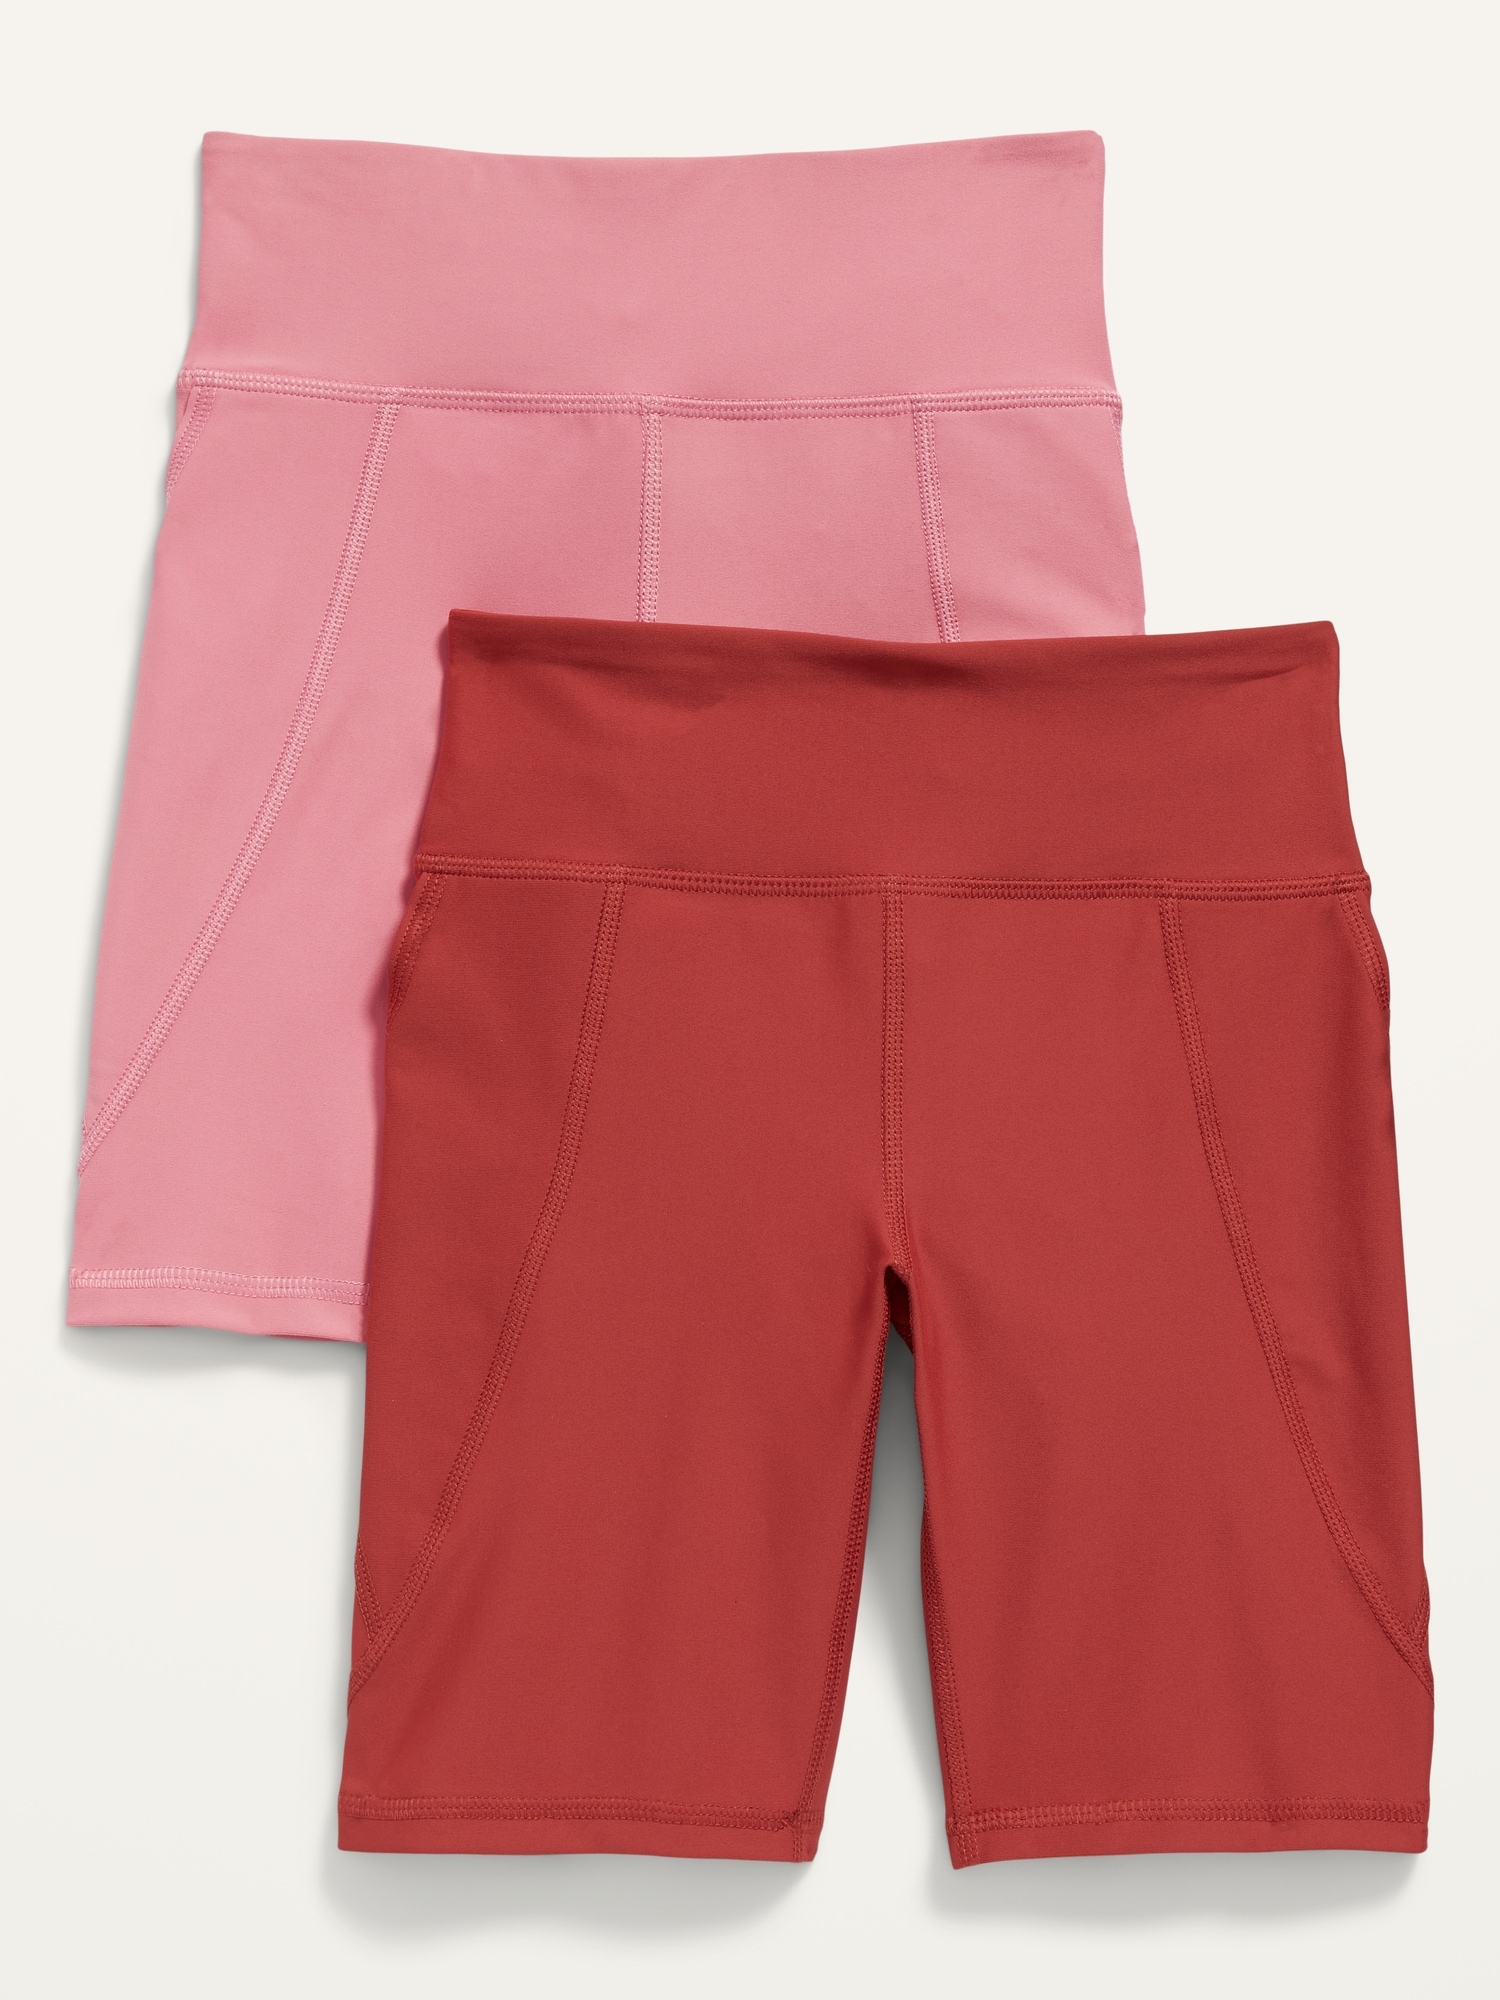 Old Navy High-Waisted PowerSoft Biker Shorts 2-Pack for Girls pink. 1